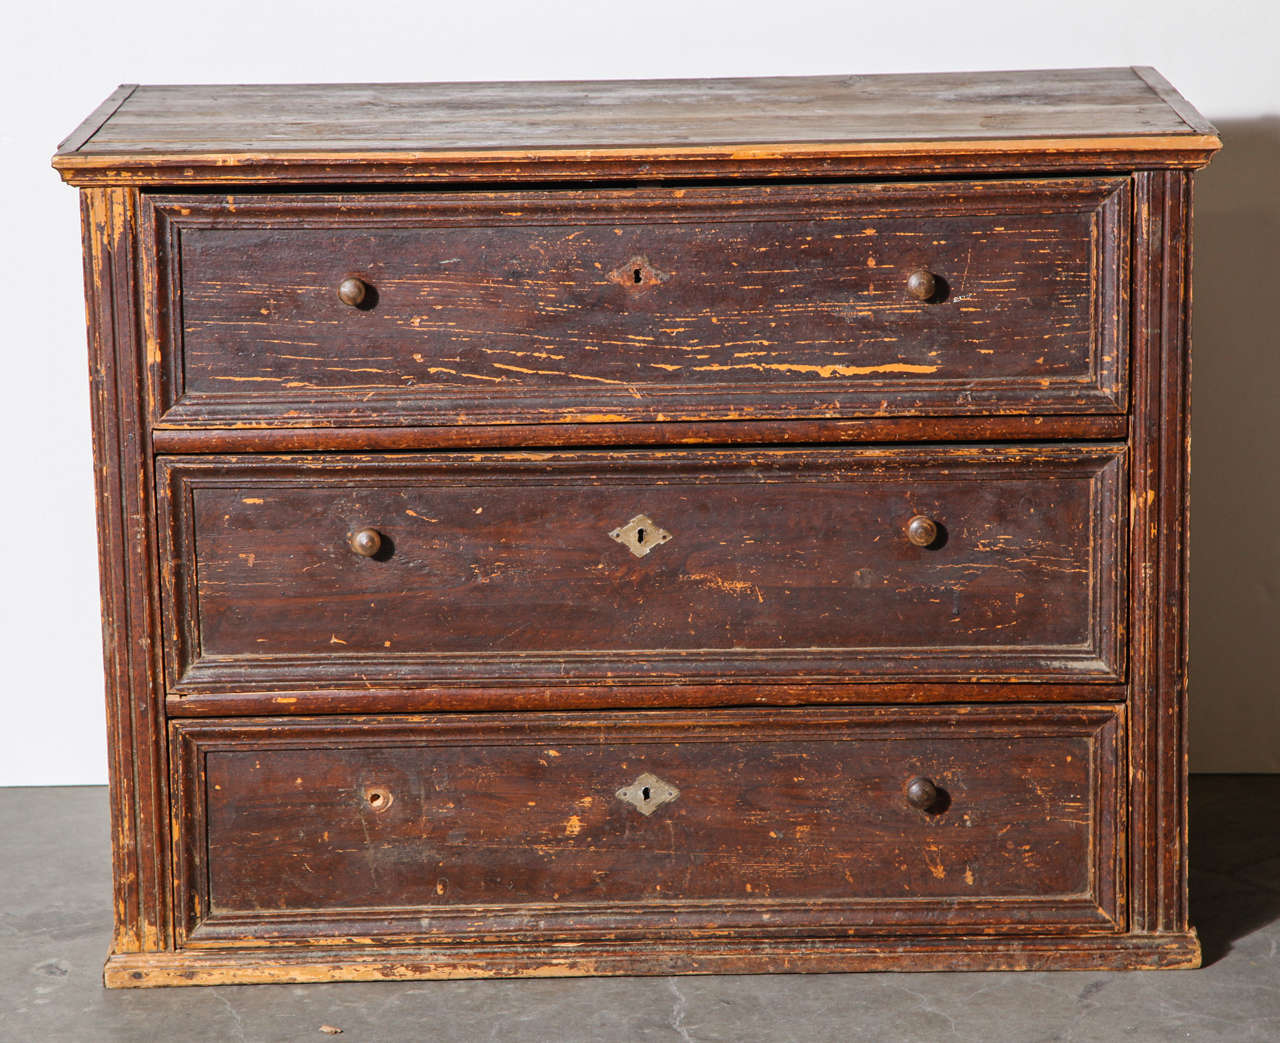 Large chest of drawers made in Belgium in the 19th century. Distressed but all drawers function. Original key included.